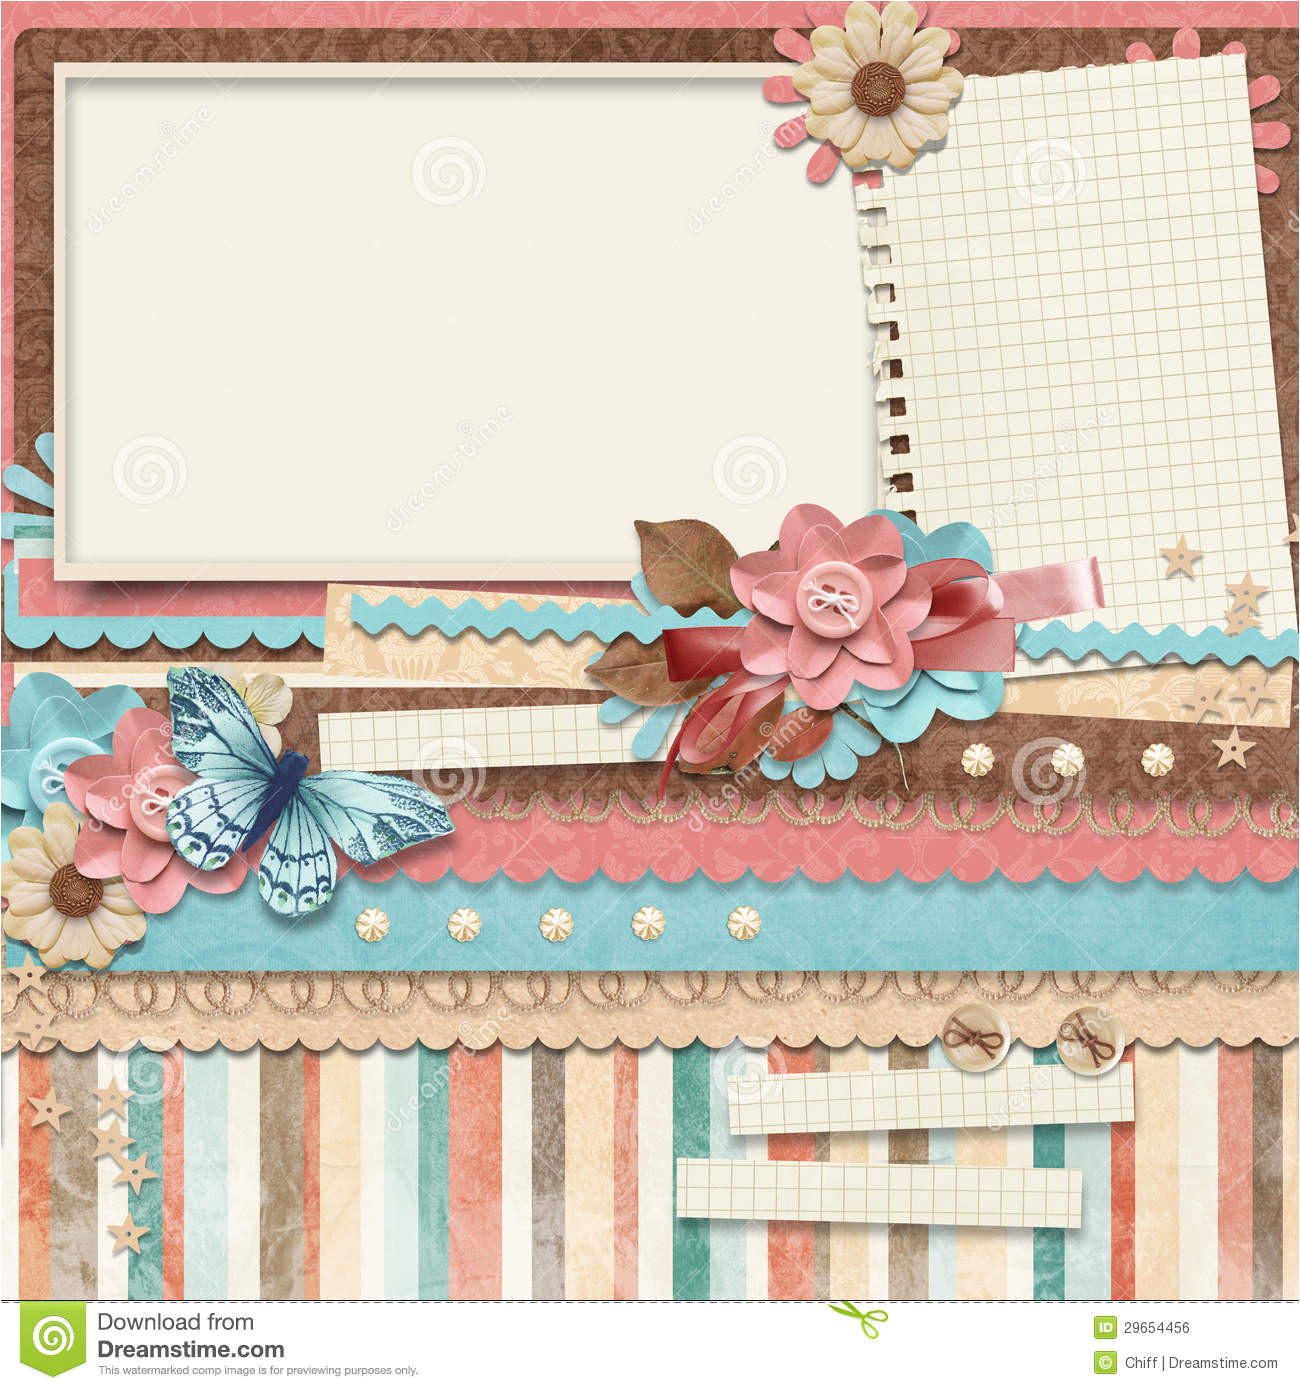 royalty free stock image retro family album 365 project scrapbooking templates image29654456